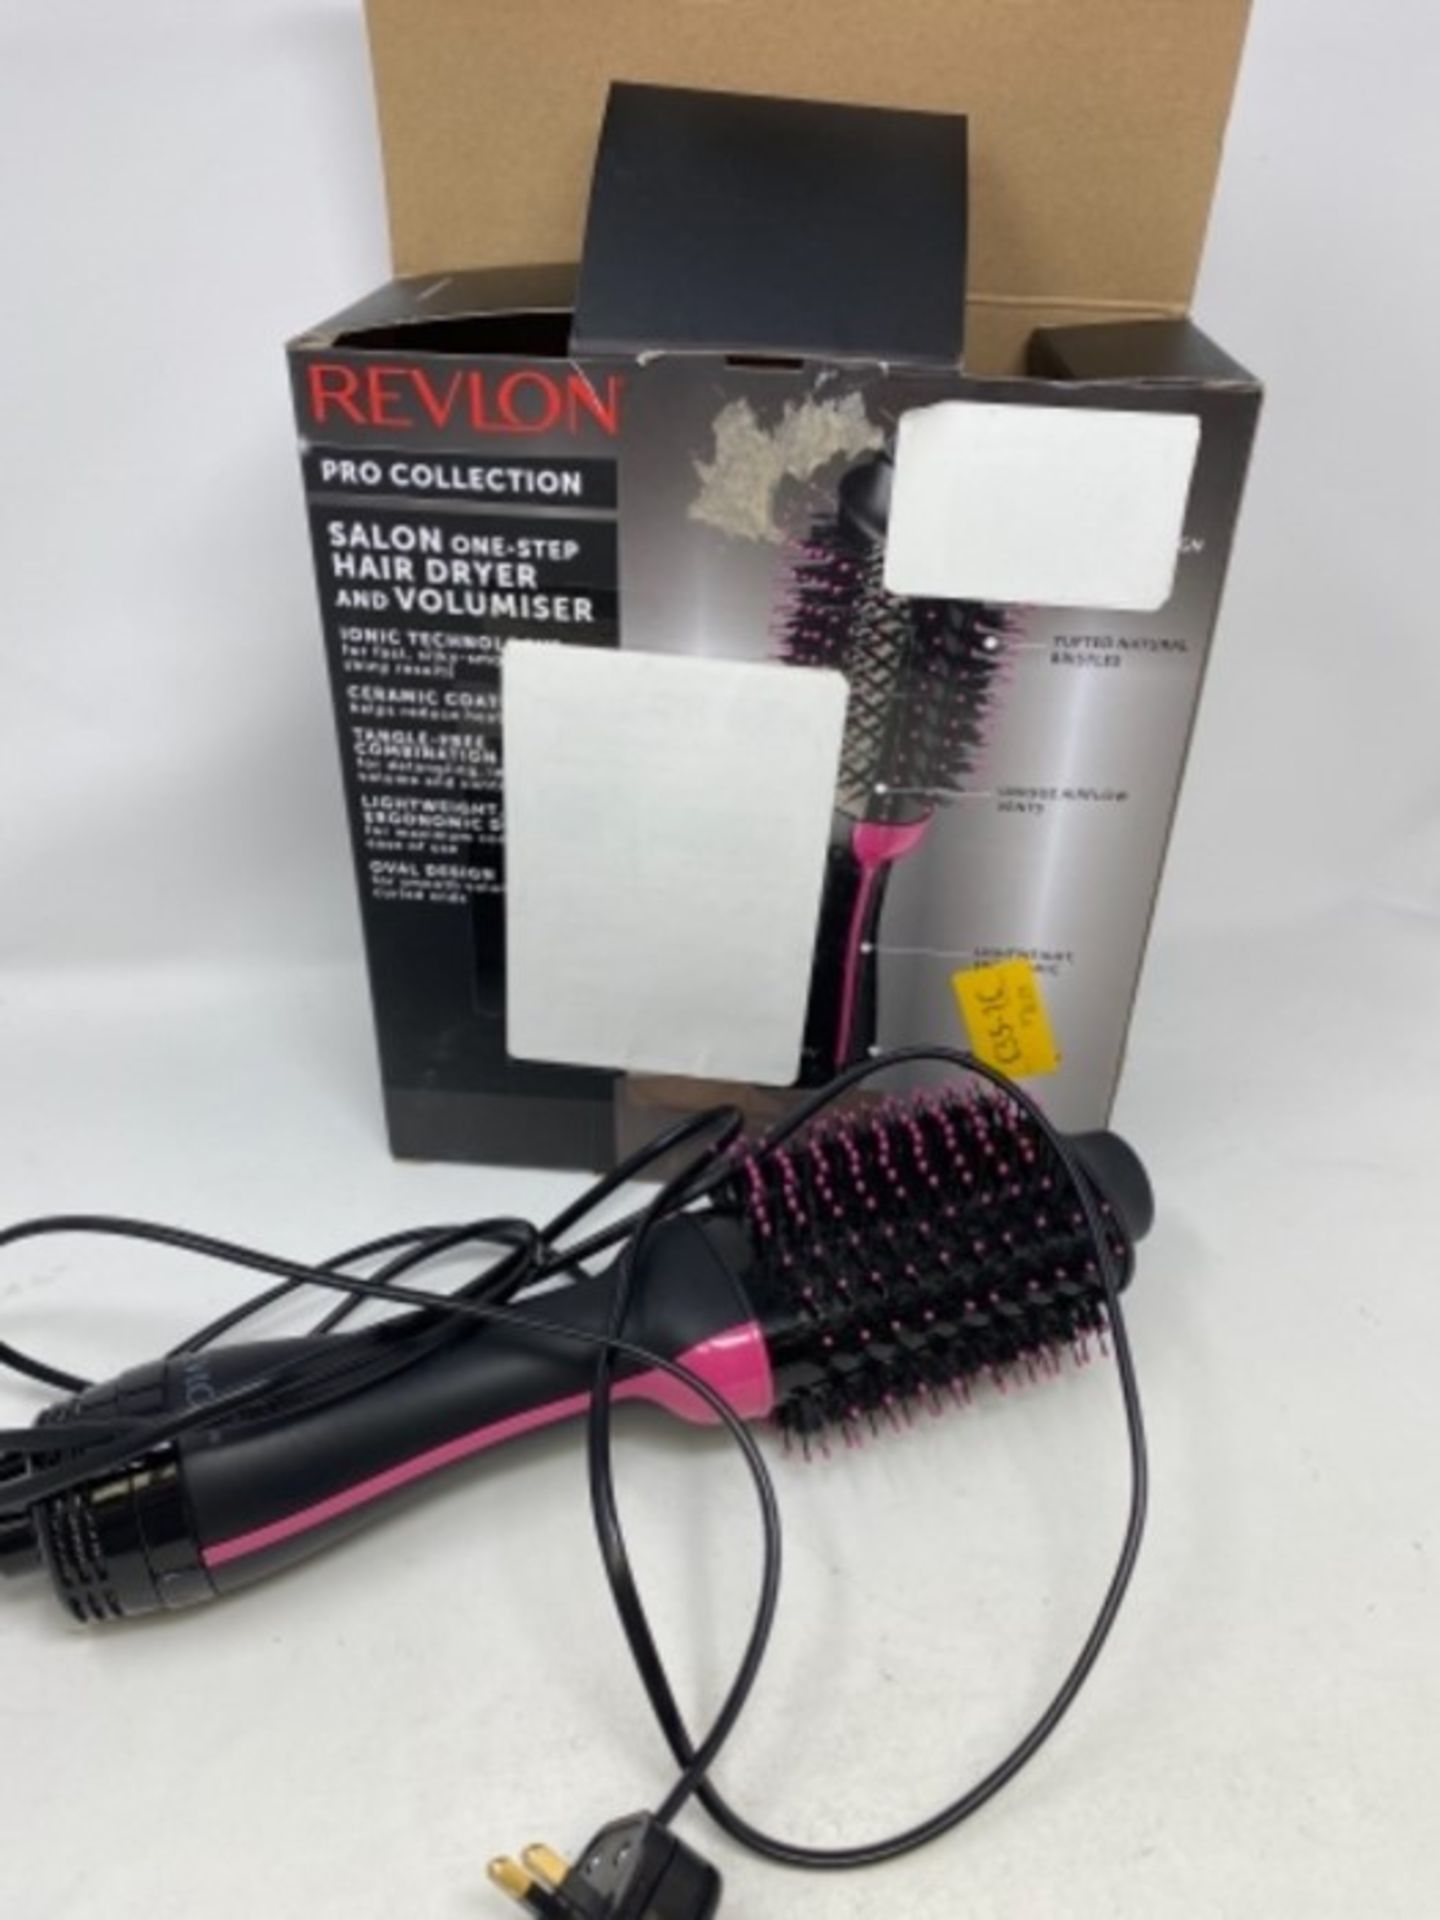 Revlon Salon One- Step Volumizer for mid to long - Image 2 of 2